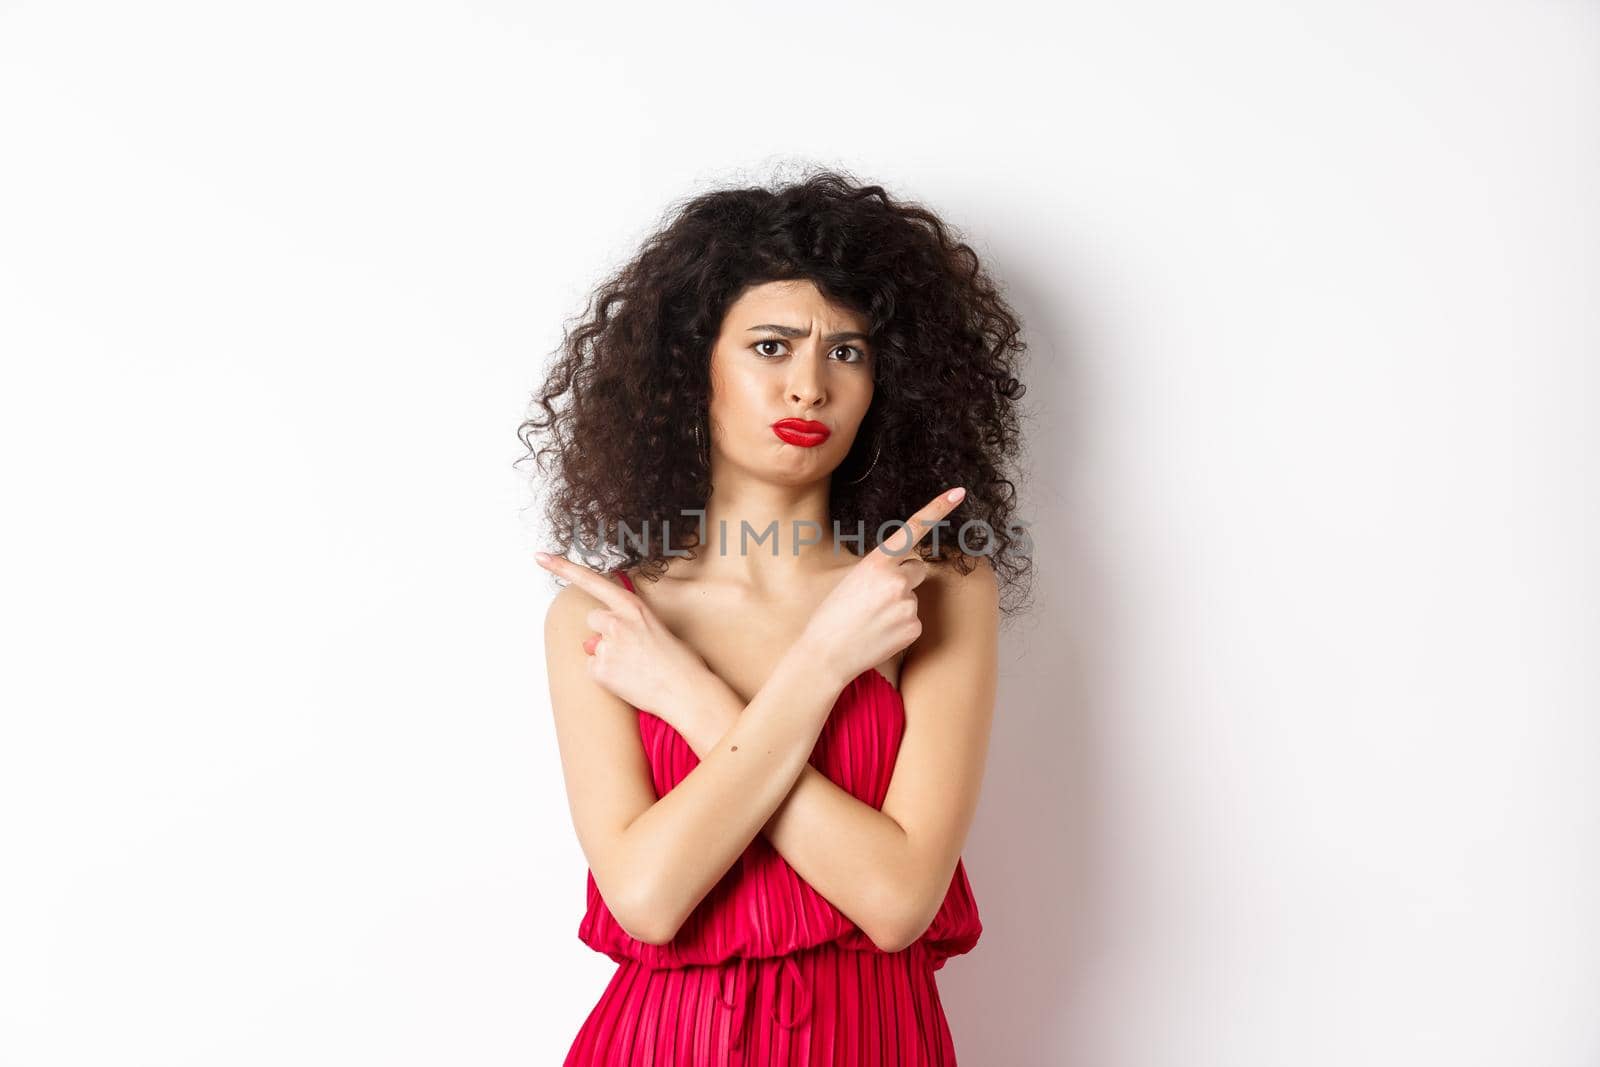 Doubtful and sad young woman in red dress, pointing fingers sideways and sulking, cant decide between products, need help with choice, standing over white background.